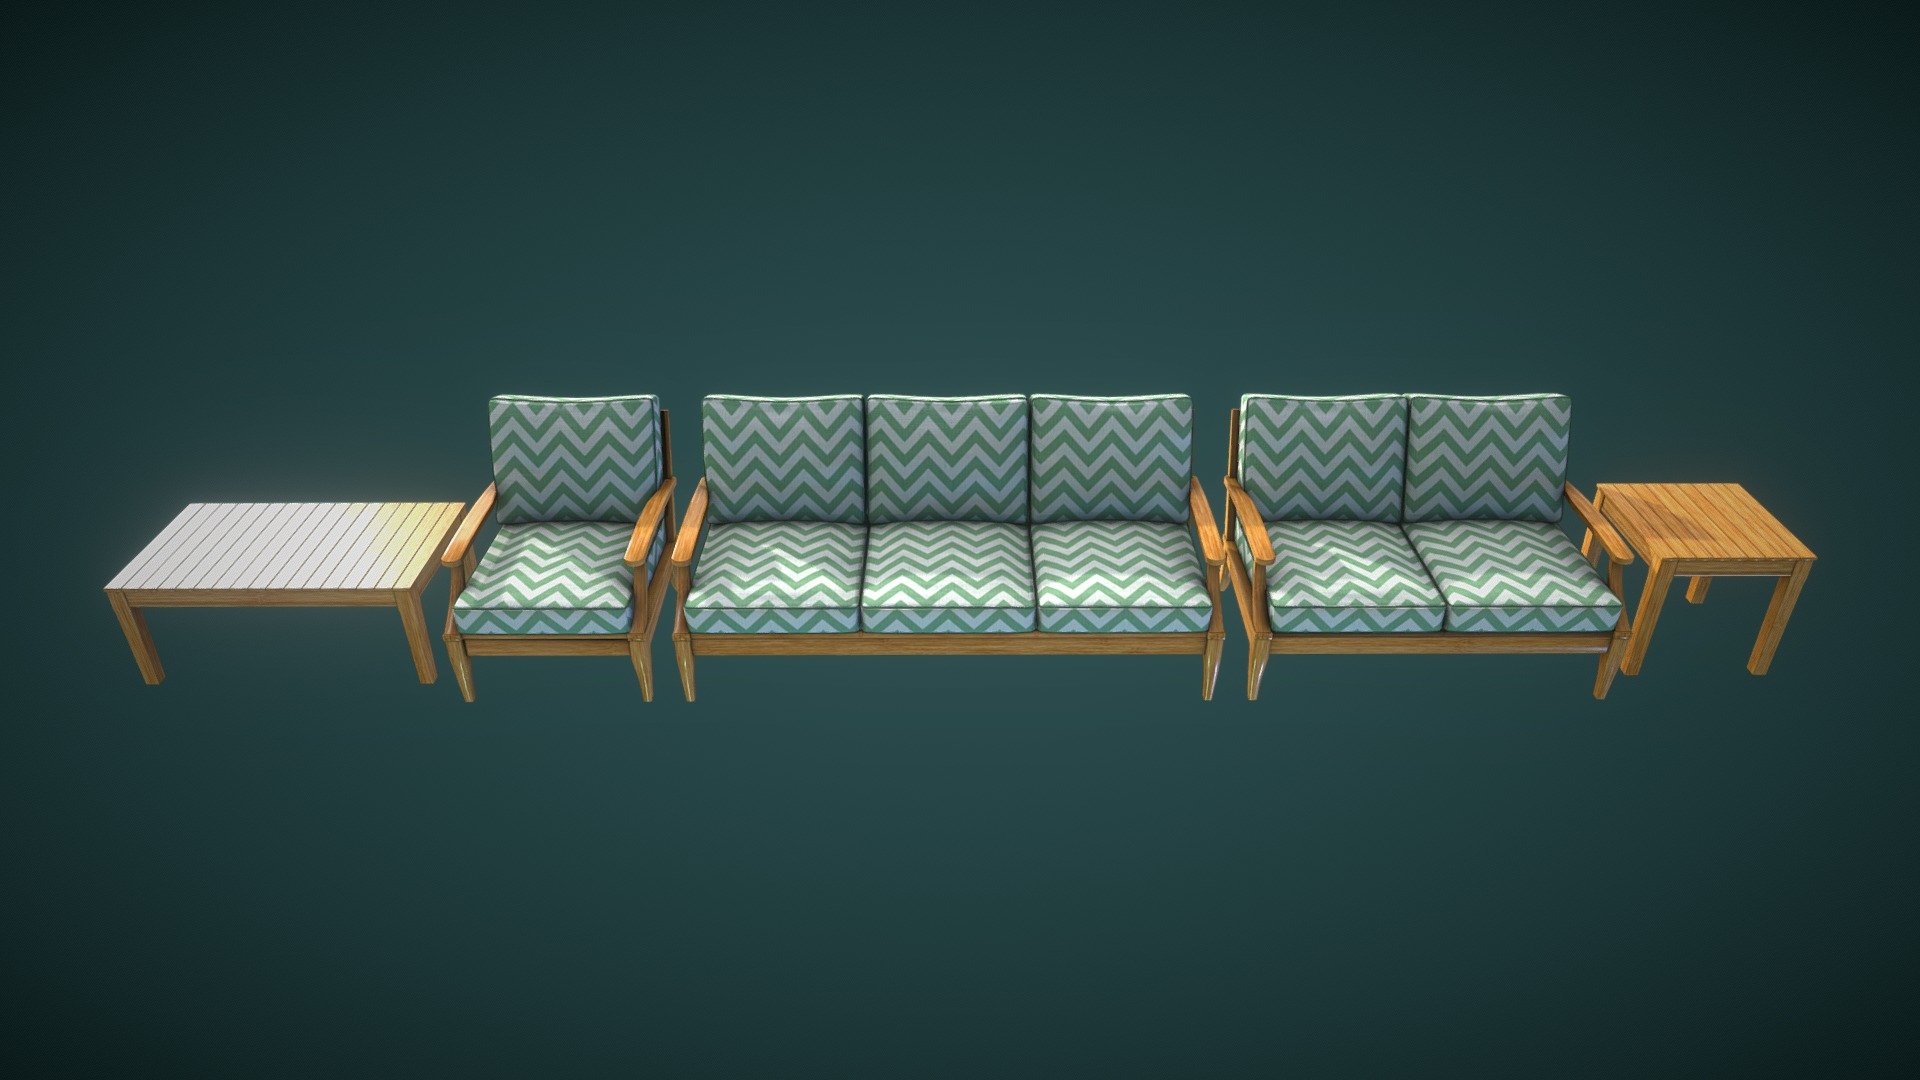 Patio Furniture Set

24,414 Polys, 24,760 Verts

Texel Density: 10.24px/cm @4069x4096, 5.12px/cm @2048x2048, 2.56px/cm @1024x1024

Only 1 Material Set

File Includes: 3D Models - FBX, OBJ, DAE, Blend, ABC, STL, and glTF. Textures - PNG, BMP, JPEG, TIFF, TGA, PSD, EXR. Maps - Base Color, Diffuse, Ambient Occlusion, Glossiness, Height, Metallic, Normal Map (OpenGL), Normal Map (Direct-X), Roughness, Specular-Level

Modeled and Rendered With Blender 3.0 Textured and Rendered With Substance 2021.1.1

Please contact me if you have any questions or business inquiries: bsw2142@gmail.com

You Can Also Get A Quote From Me Via Questioneer! Google Forms

Updated 05/04/2022: Reduced Poly From 75k to 25k. Reduced Material Channels From 6 to only 1. Created A New Texture Set. 

 - Patio Furniture - Buy Royalty Free 3D model by Brandon Westlake (@dr.badass2142) 3d model